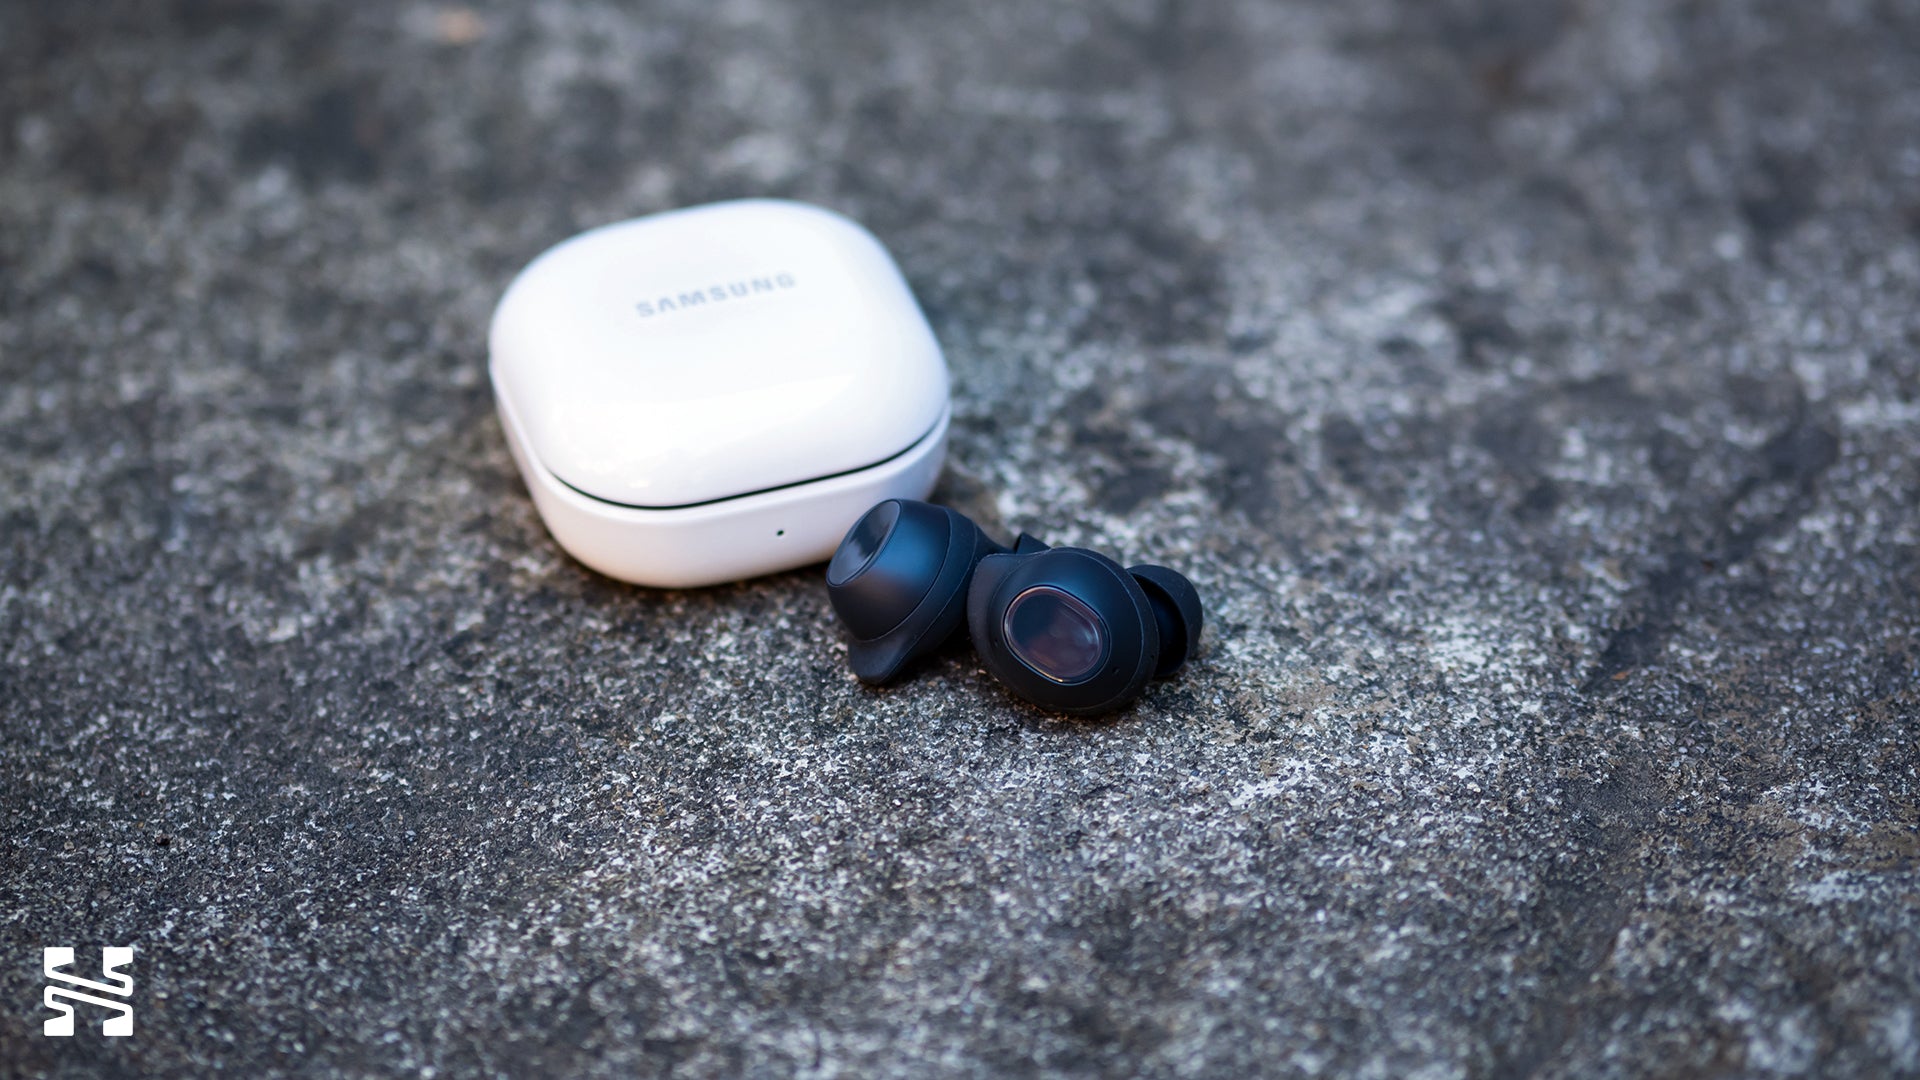 Samsung Galaxy Buds FE review: Are these $100 earbuds worth it